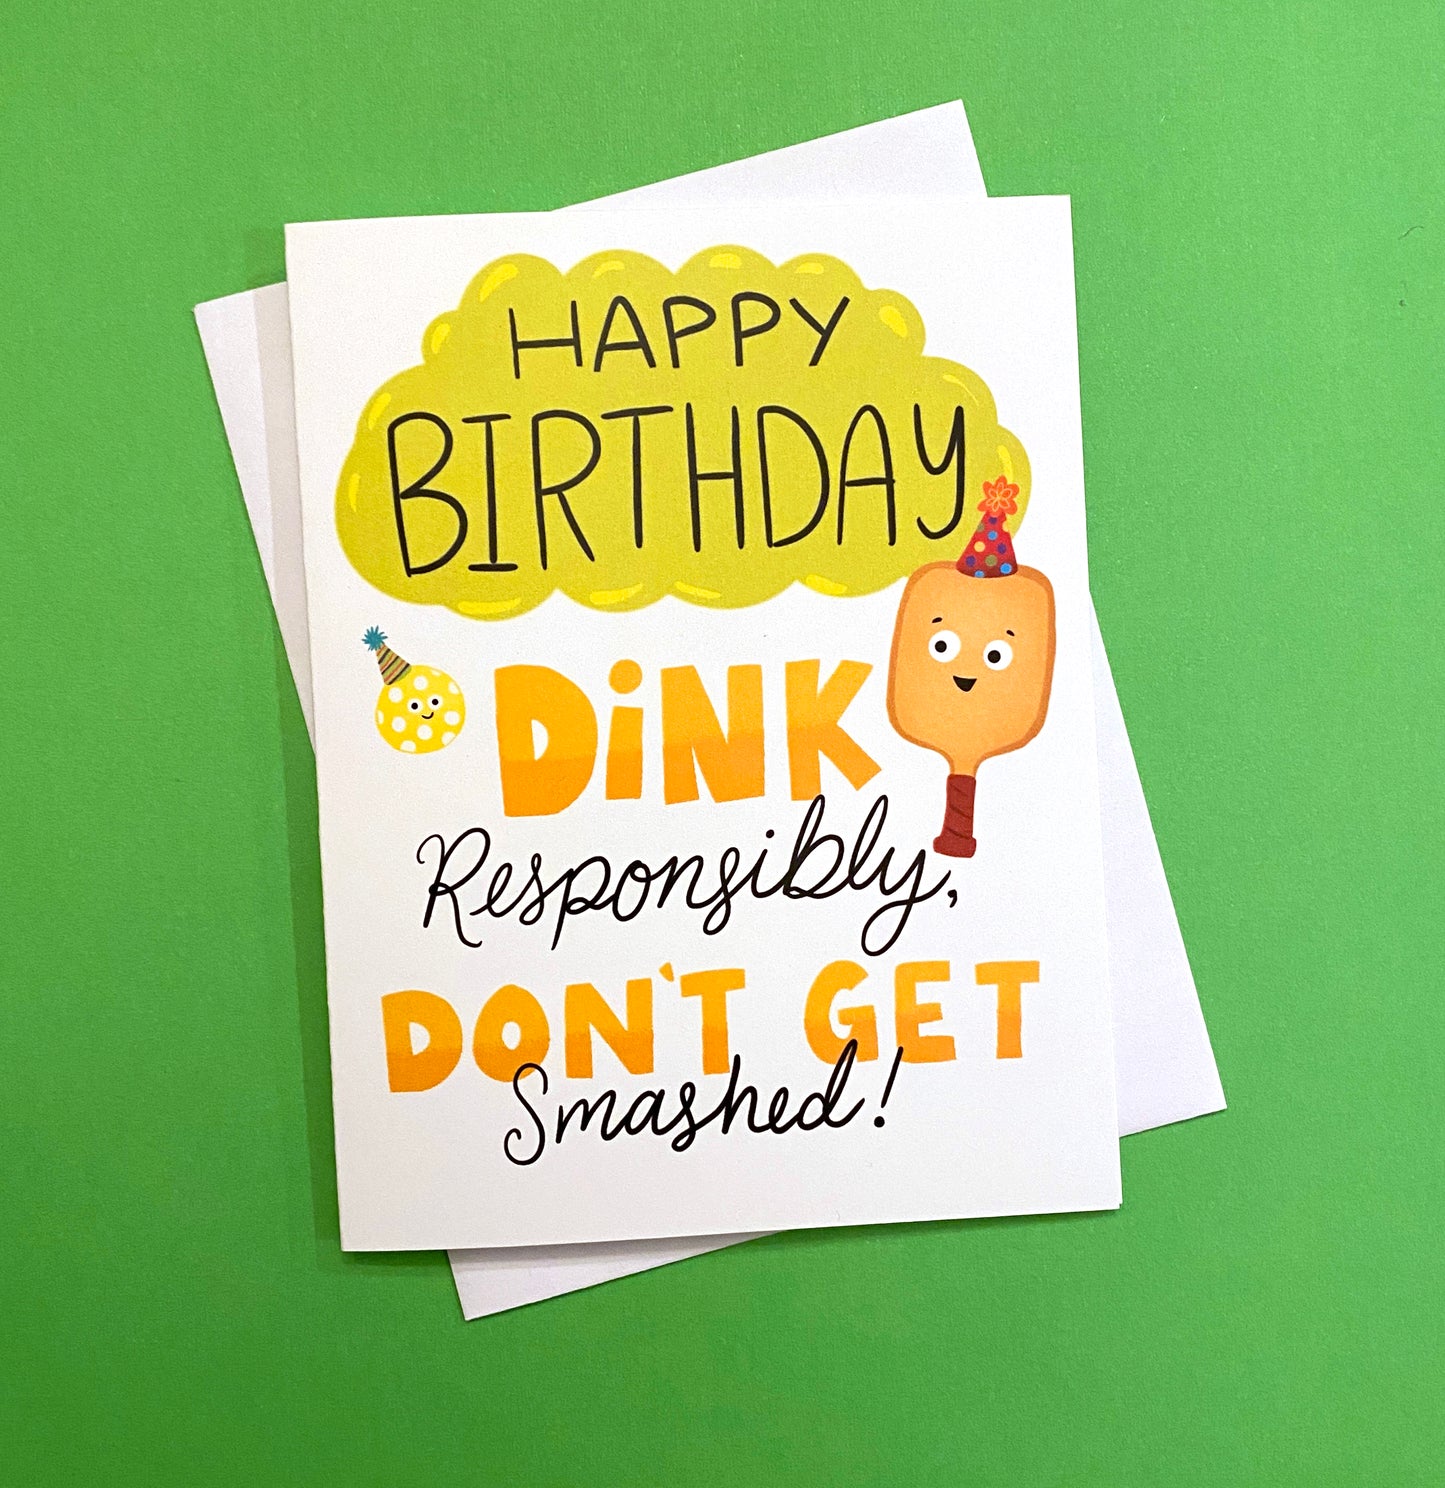 Funny Pickleball Birthday Card for your pickleball loving friend! Size A2 greeting card (4.25" x 5.5") with envelope, blank Inside. All cards are designed and Illustrated with love by me, Anna Fox, and are printed at my friendly neighborhood print shop in Denver, CO.